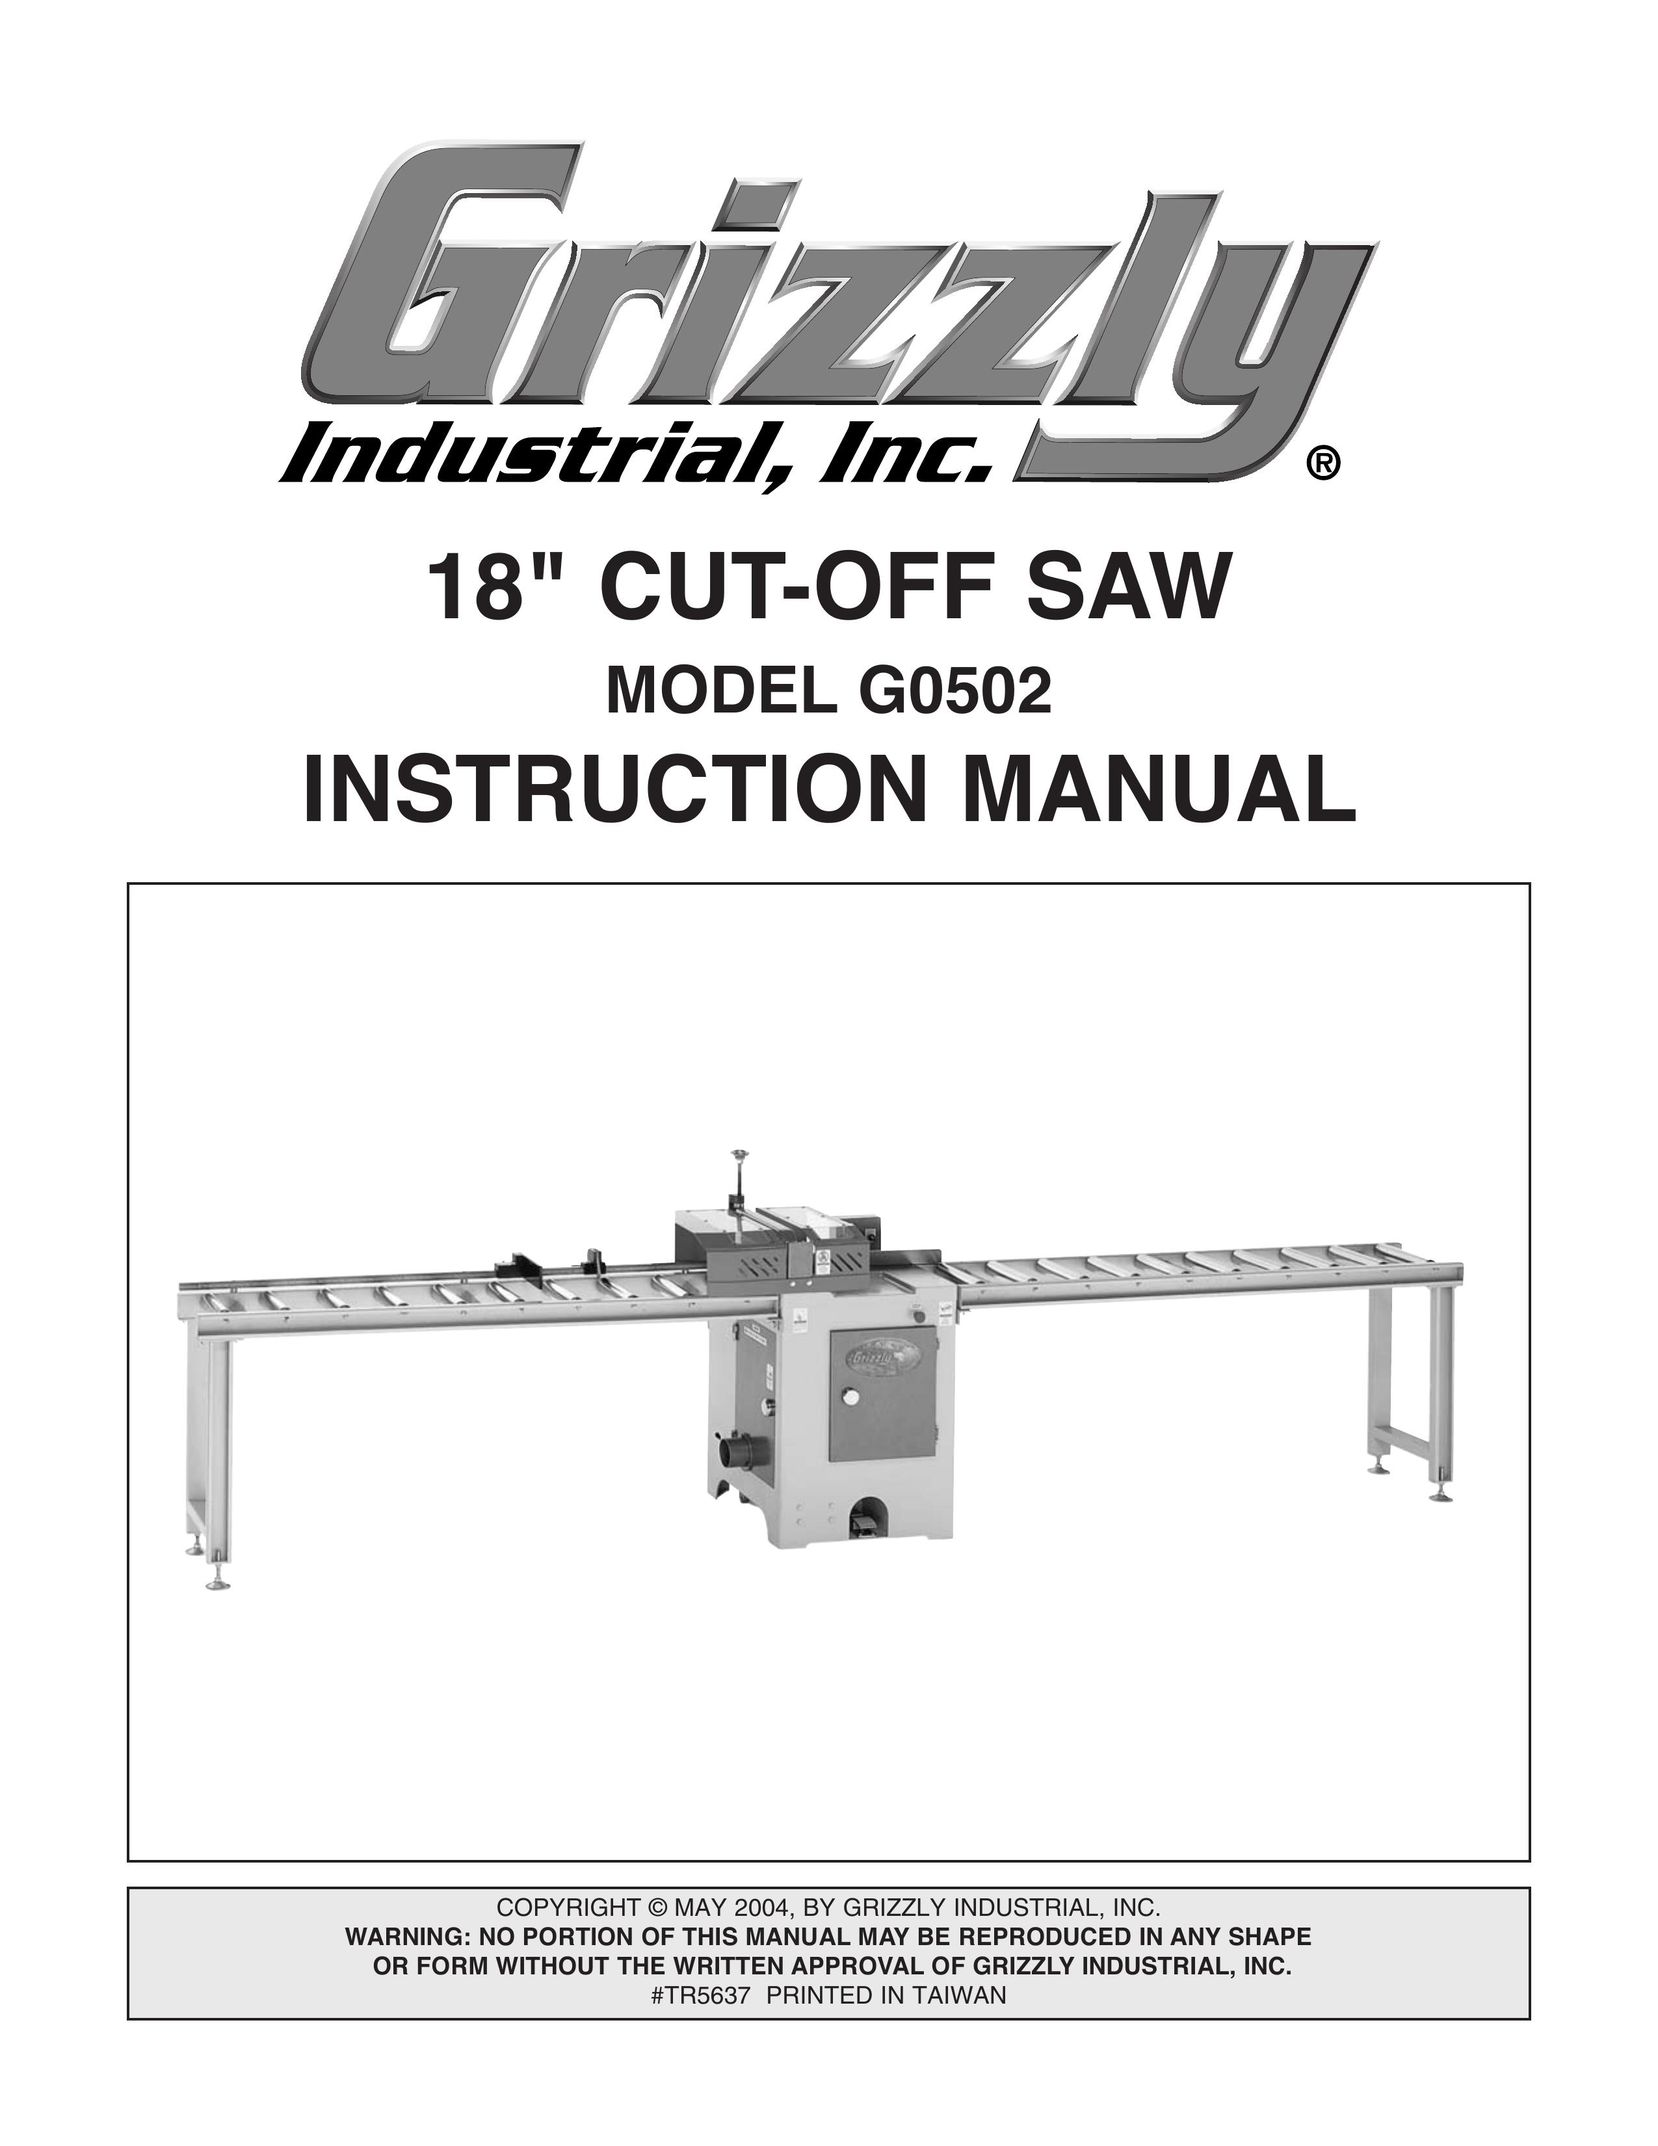 Grizzly G0502 Saw User Manual